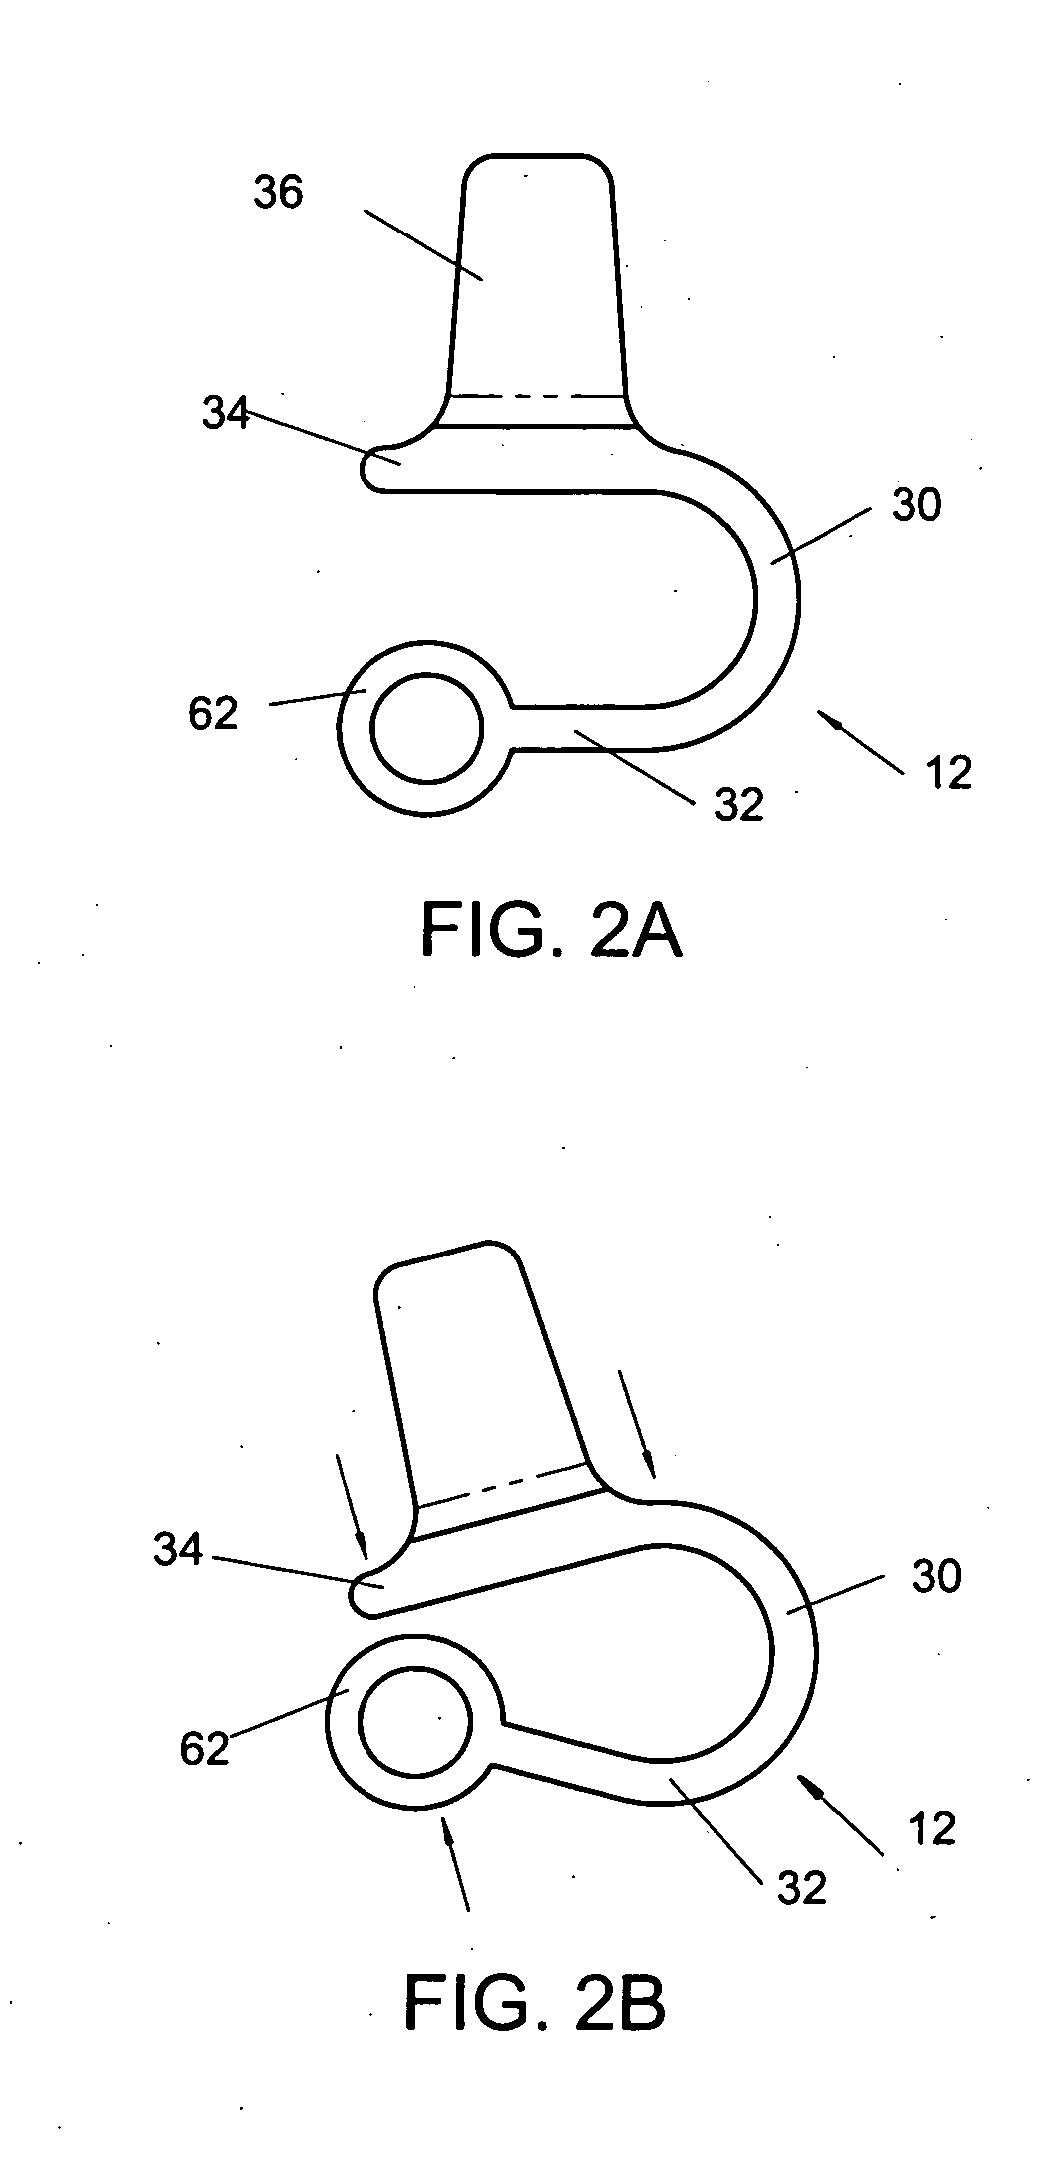 Interspinous vertebral and lumbosacral stabilization devices and methods of use